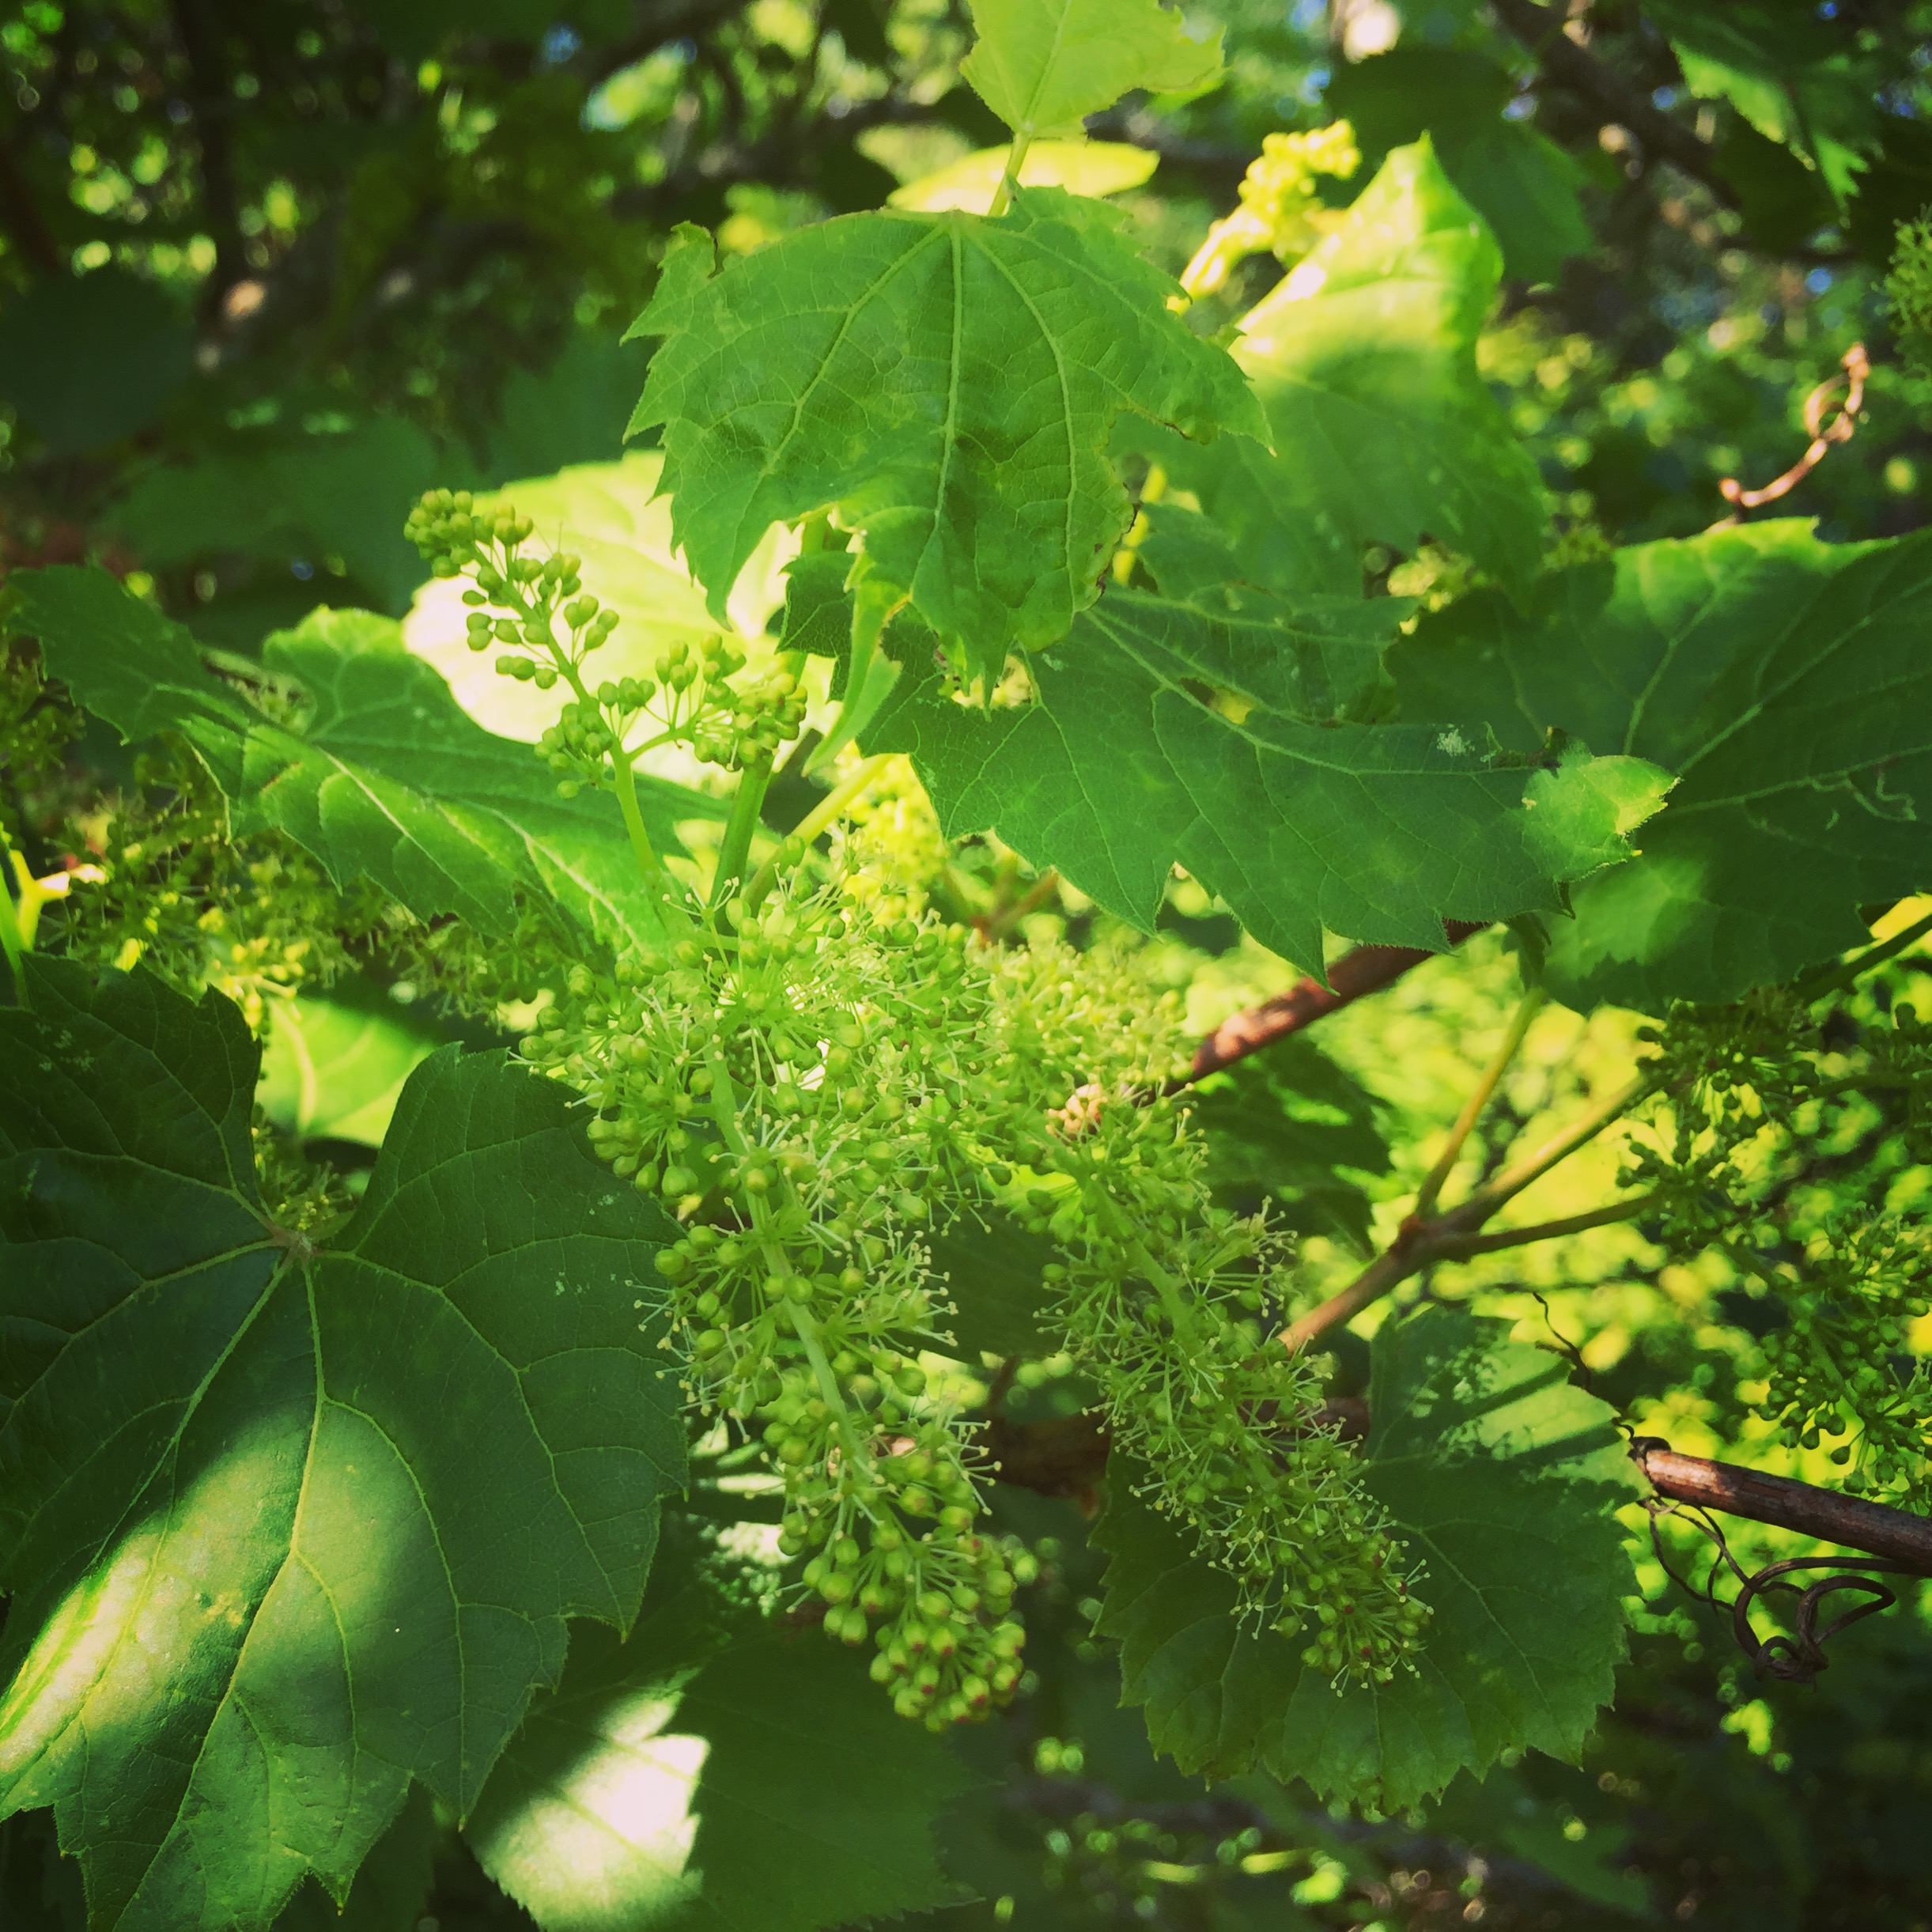  The grapes are blooming! I rarely catch a glimpse of them this time of year, among the explosion of greenery that signals a North Country June. 